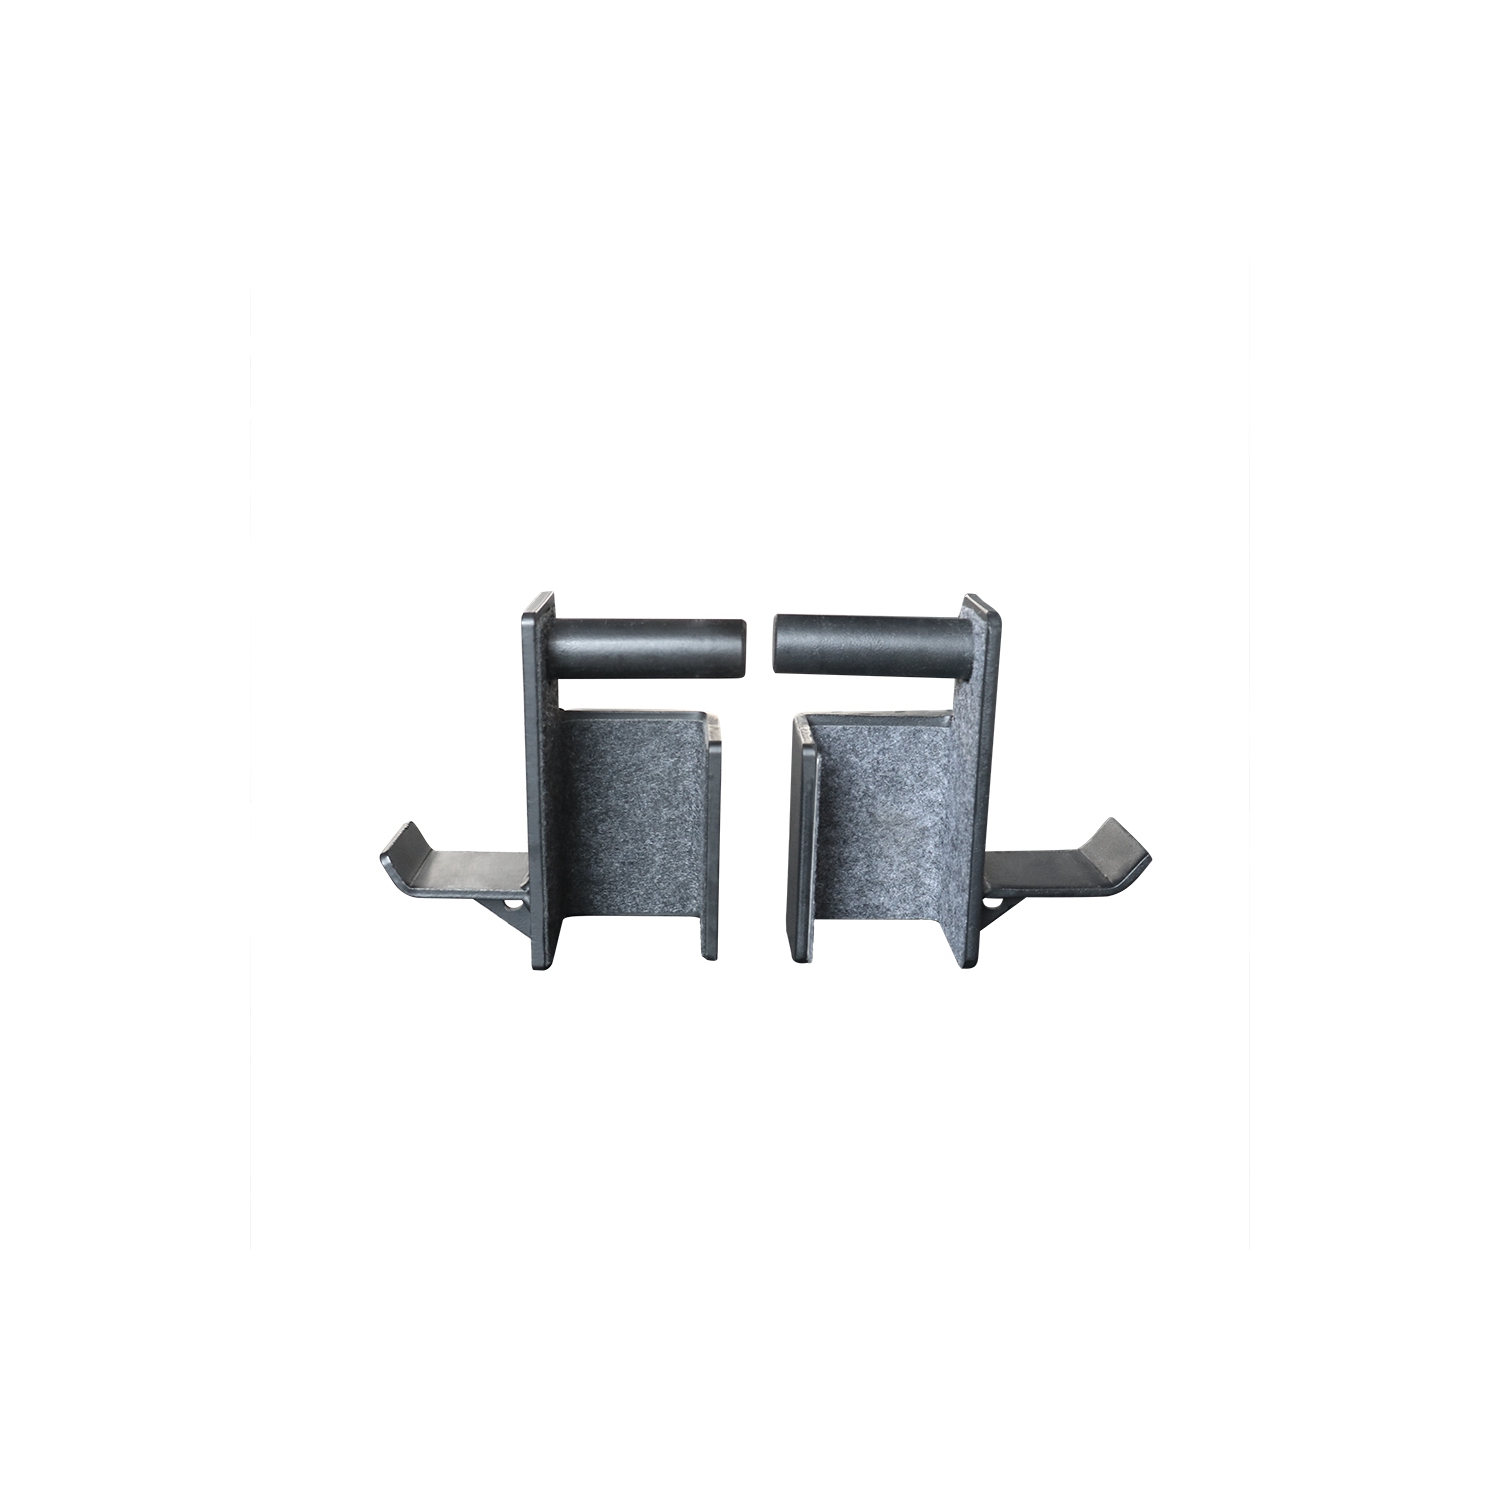 PRISP J-Hooks for Squat Stand - Compatible with 2 x 2 Inch Racks, Sold in Pairs